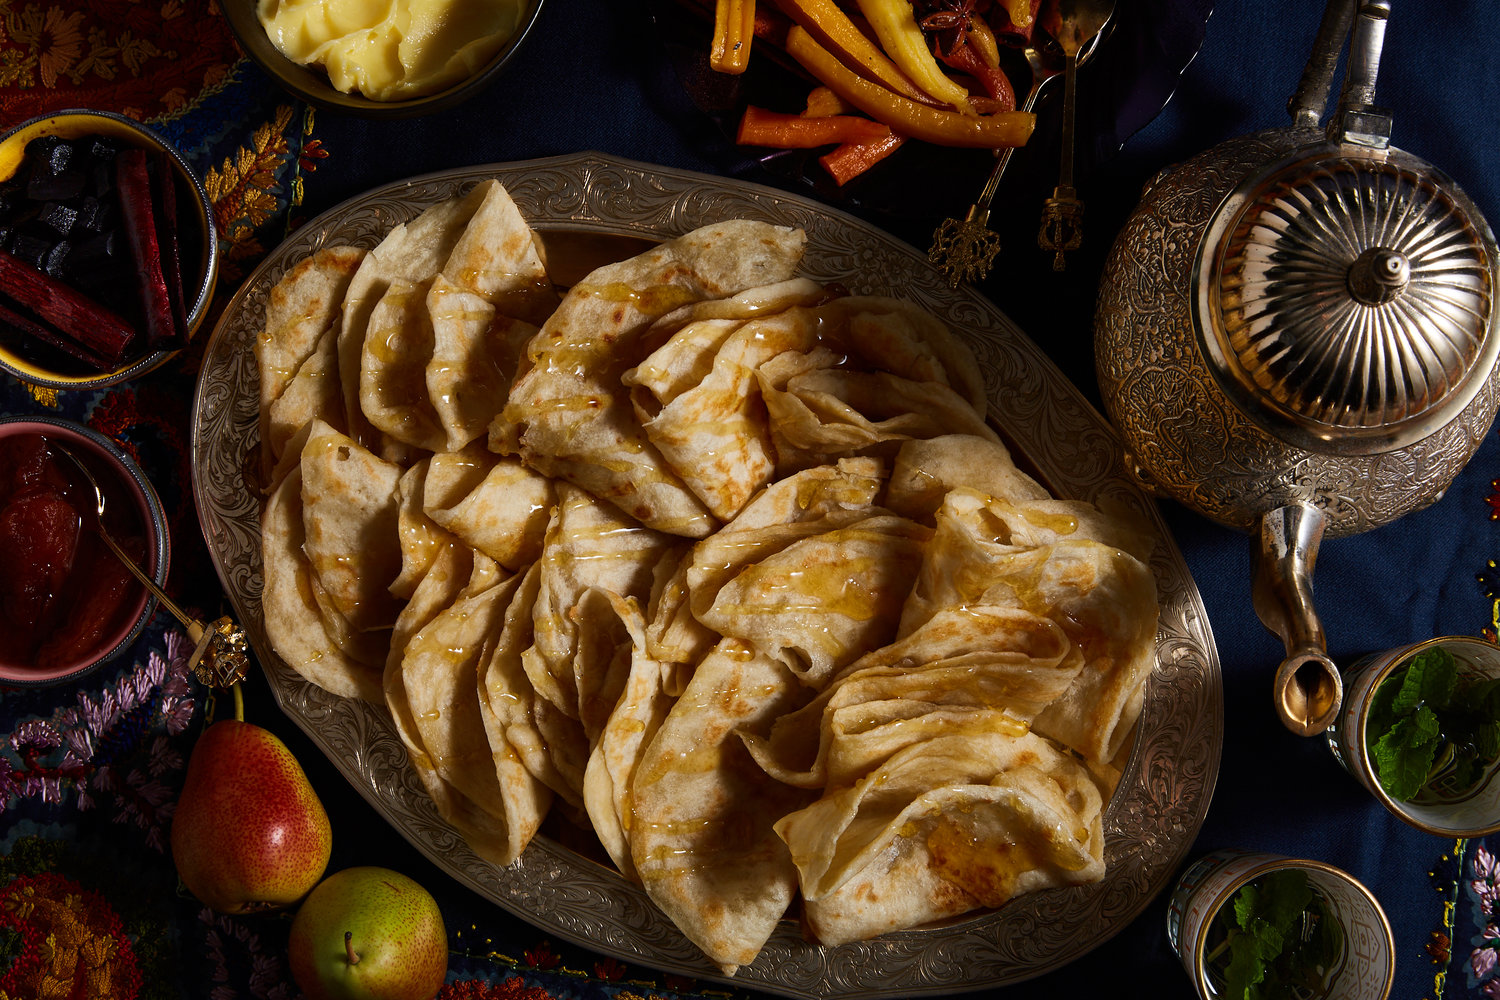 Moroccan crepes (mufleta) drizzled with honey